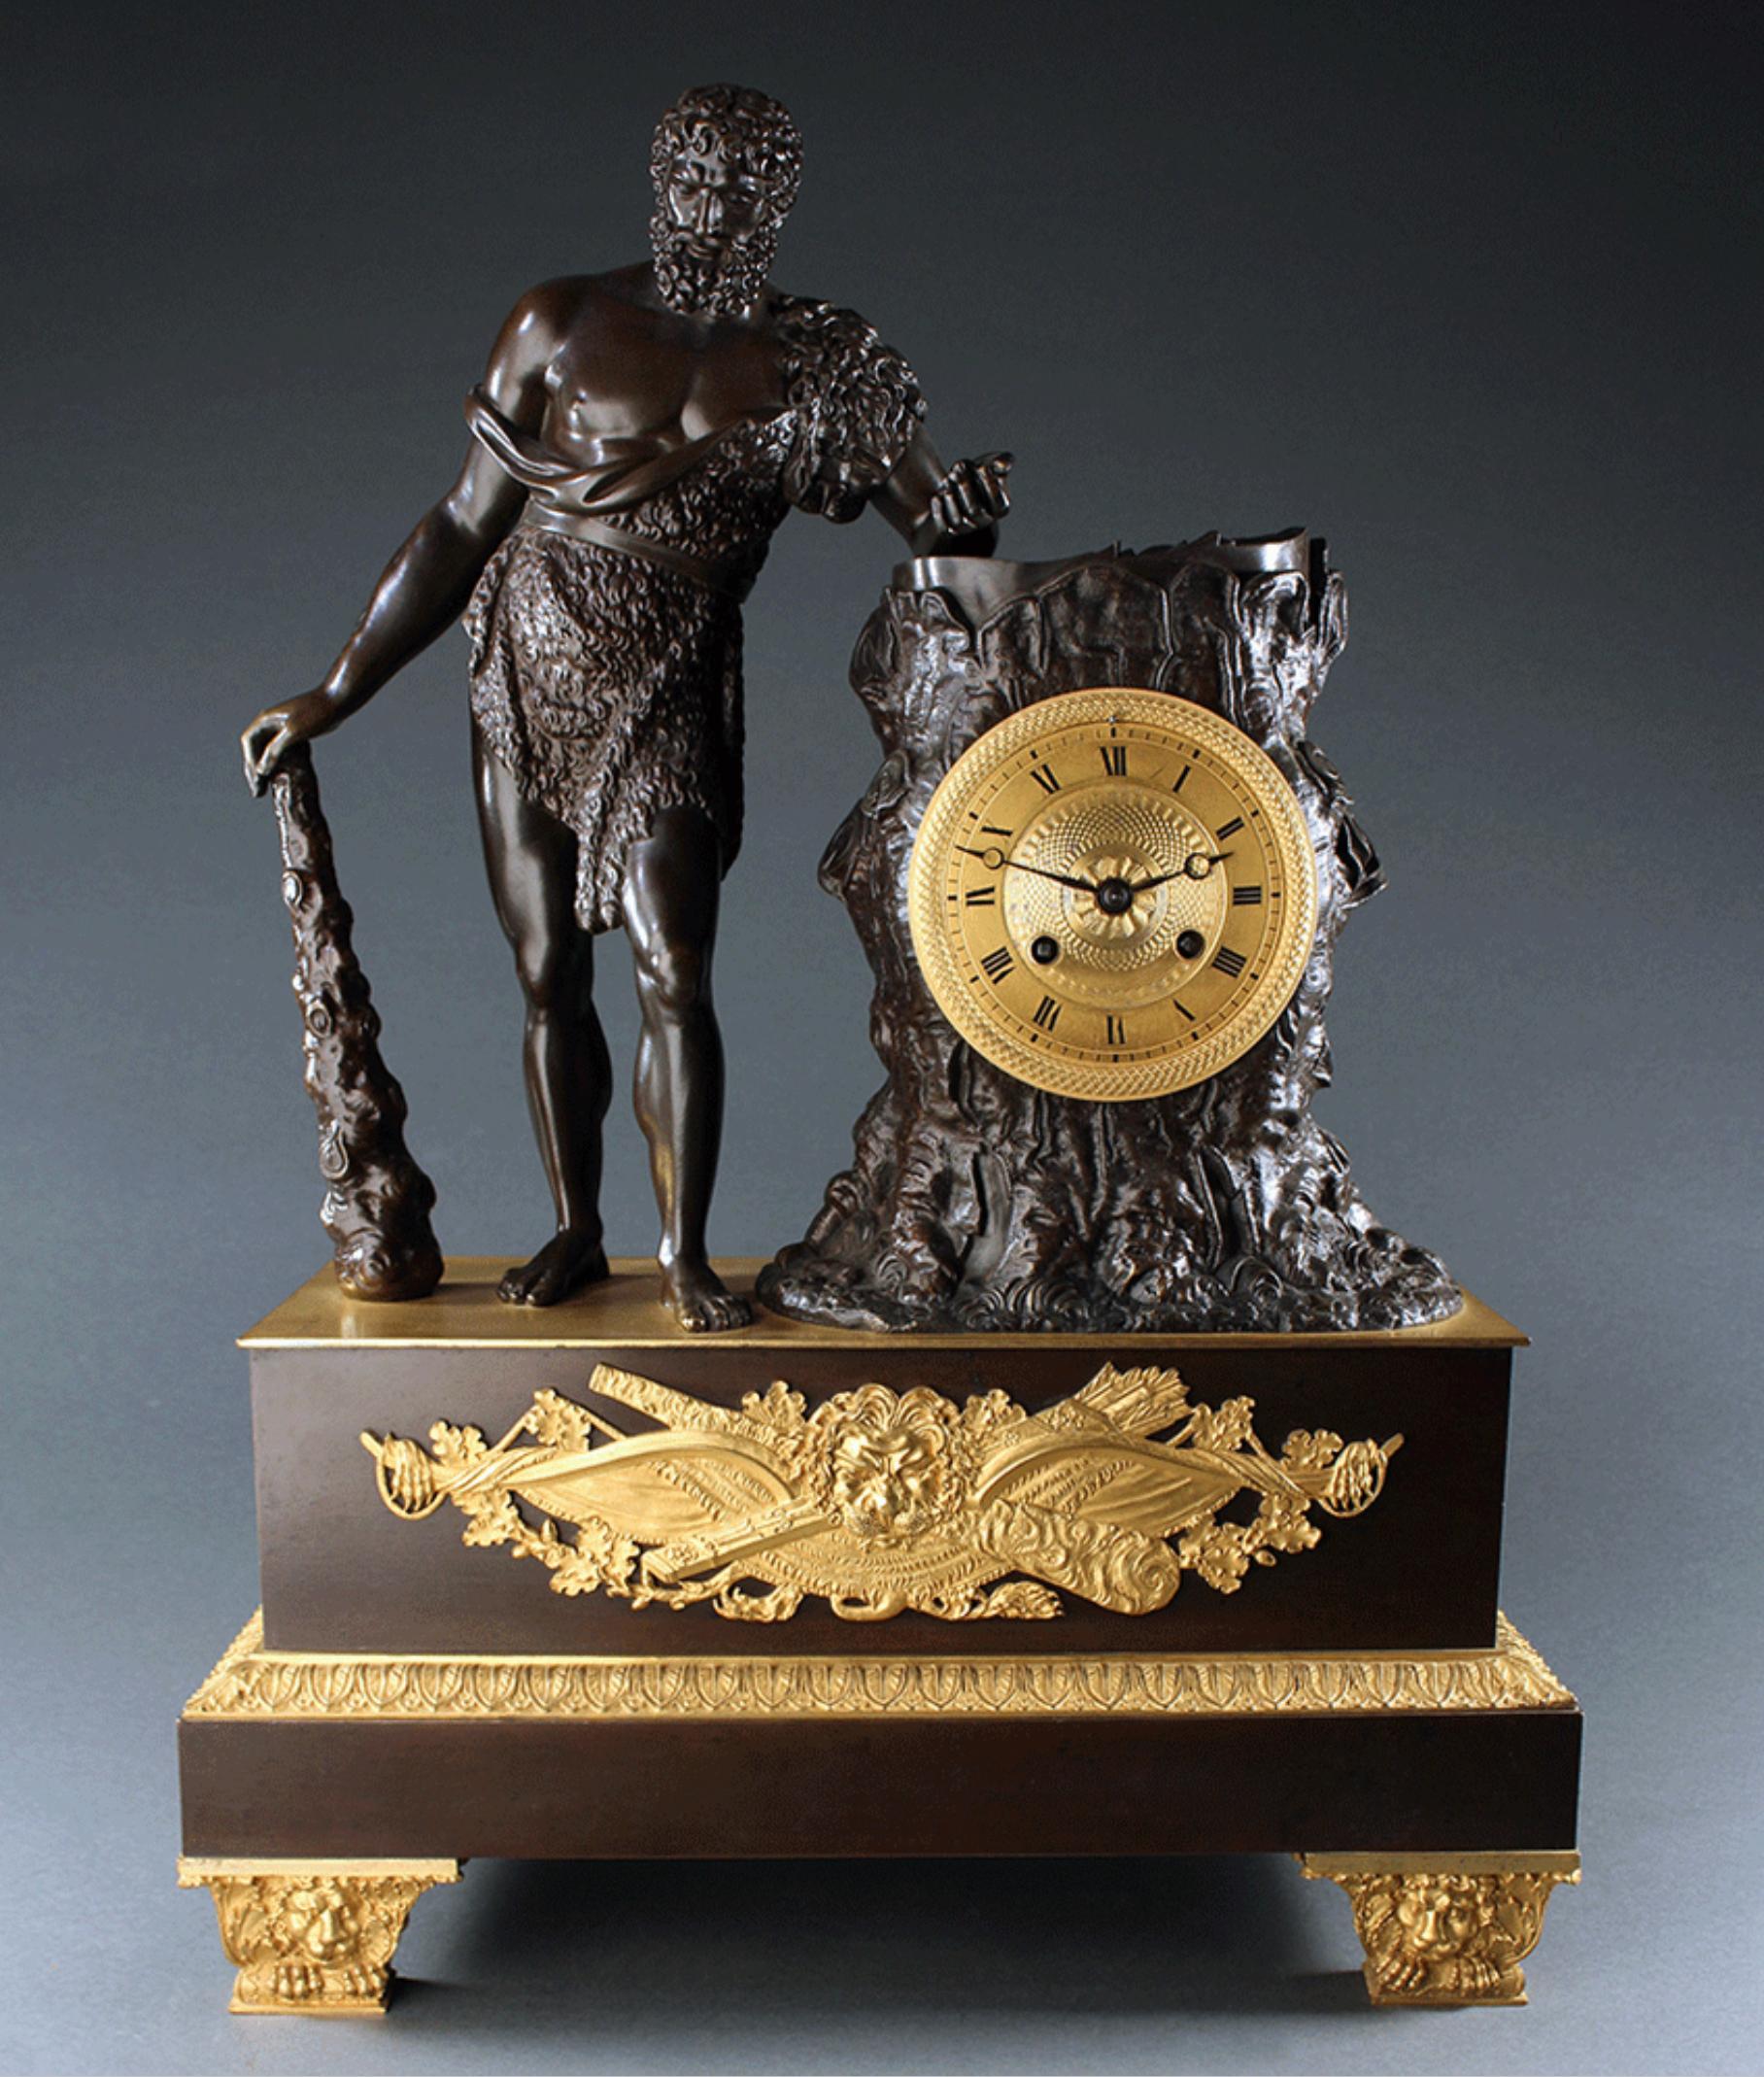 Classic early 19th century French Empire ormolu gilt and patinated bronze mantel clock depicting one of the twelve labours of Hercules/Herakles, stealing the apple of Hesperides. Beautifully cast and chased this large size clock is surmounted by a